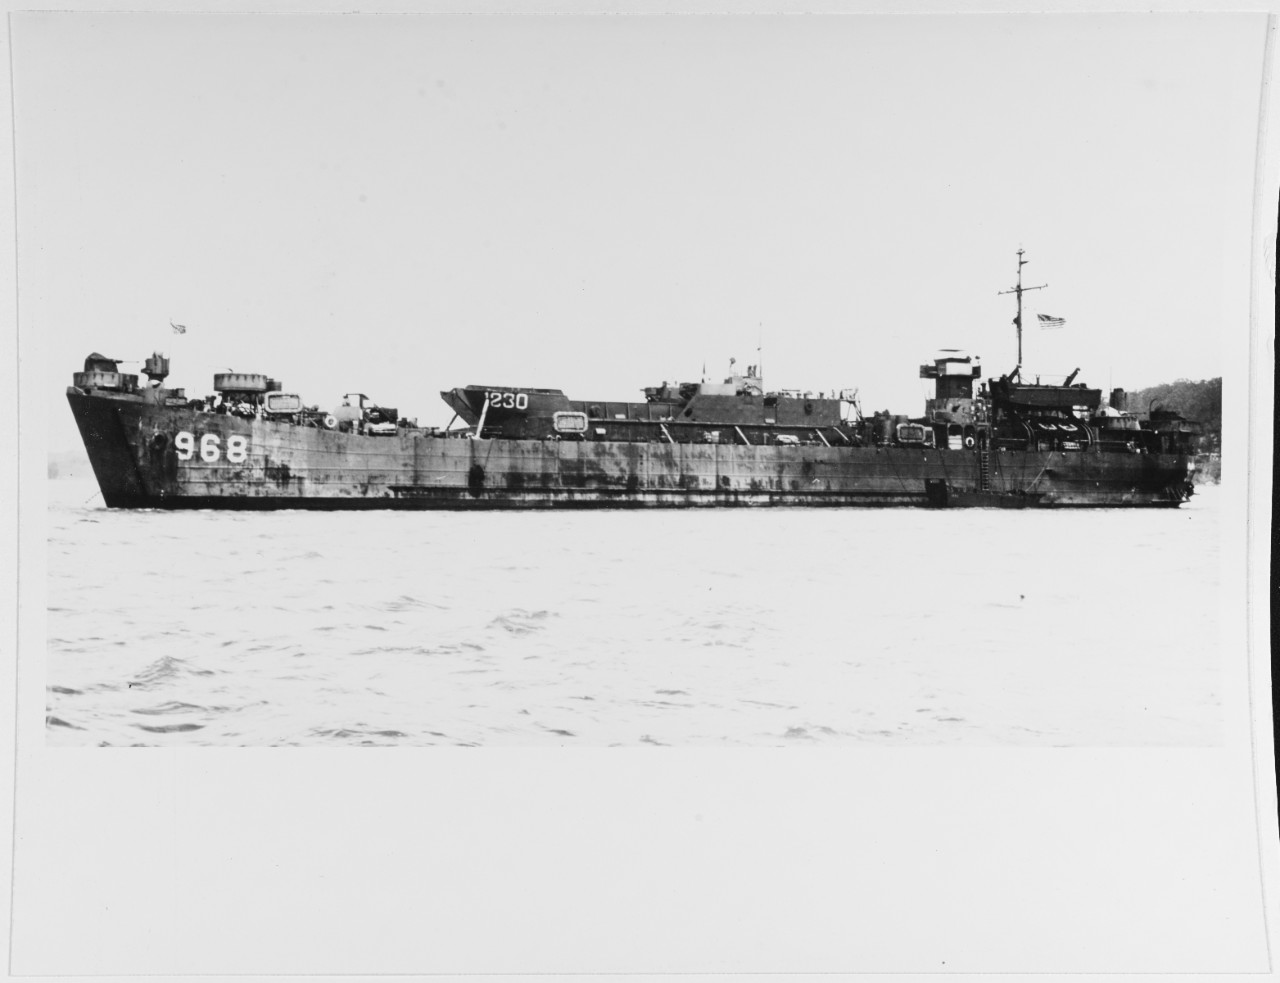 USS LST - 968 with LCT -1230 on deck, circa 1945-46.